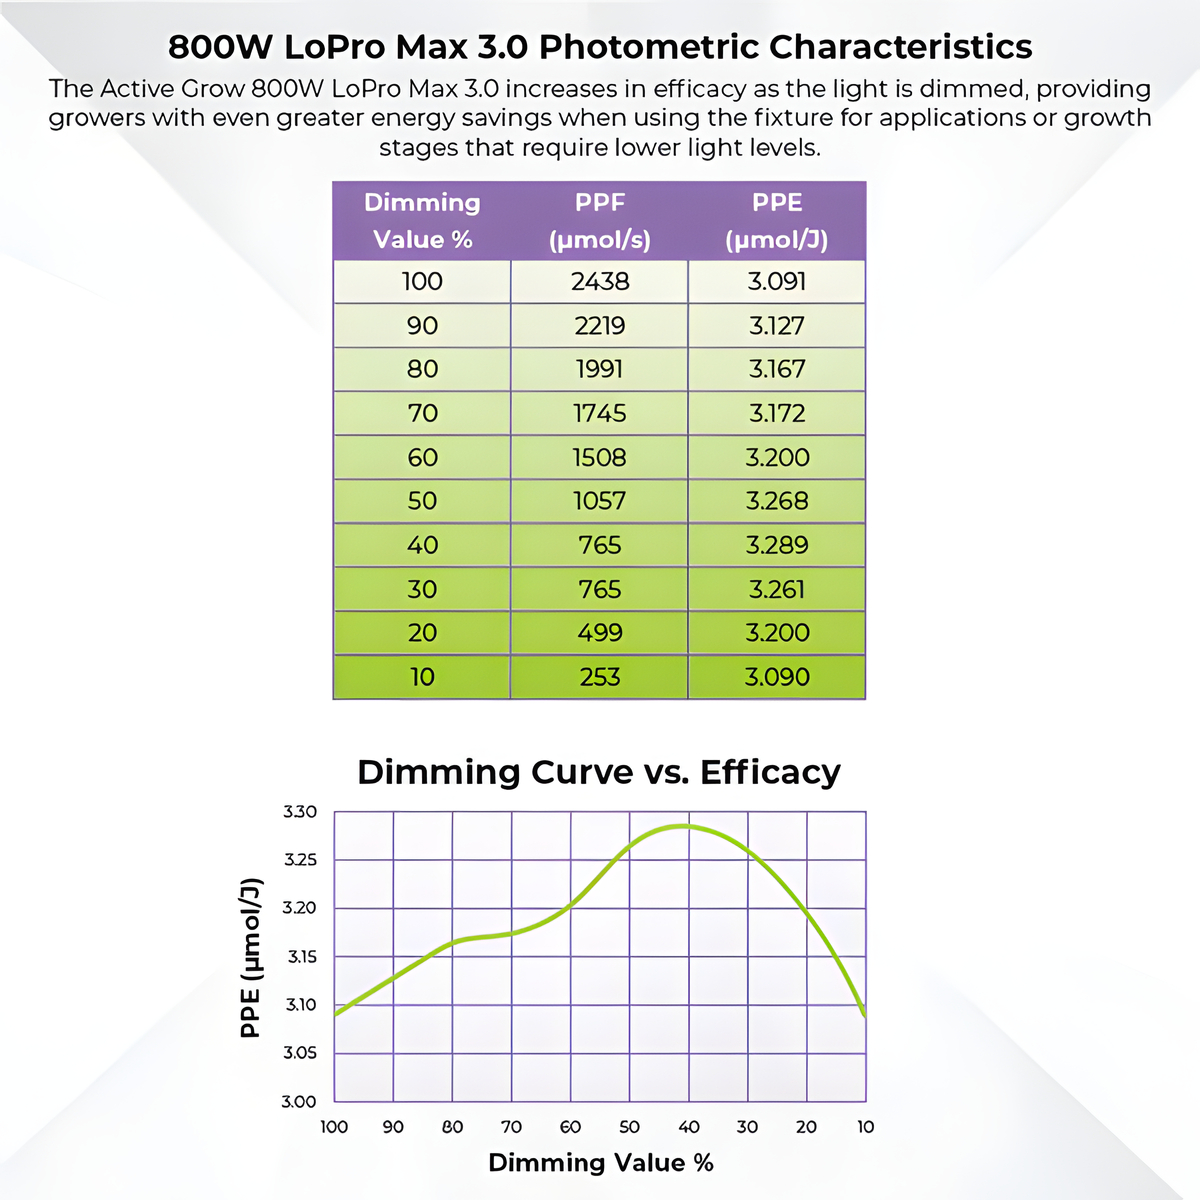 Active Grow's LoPro Max 3.0 Grow Lights surpass the industry benchmark by delivering higher intensity PPFD